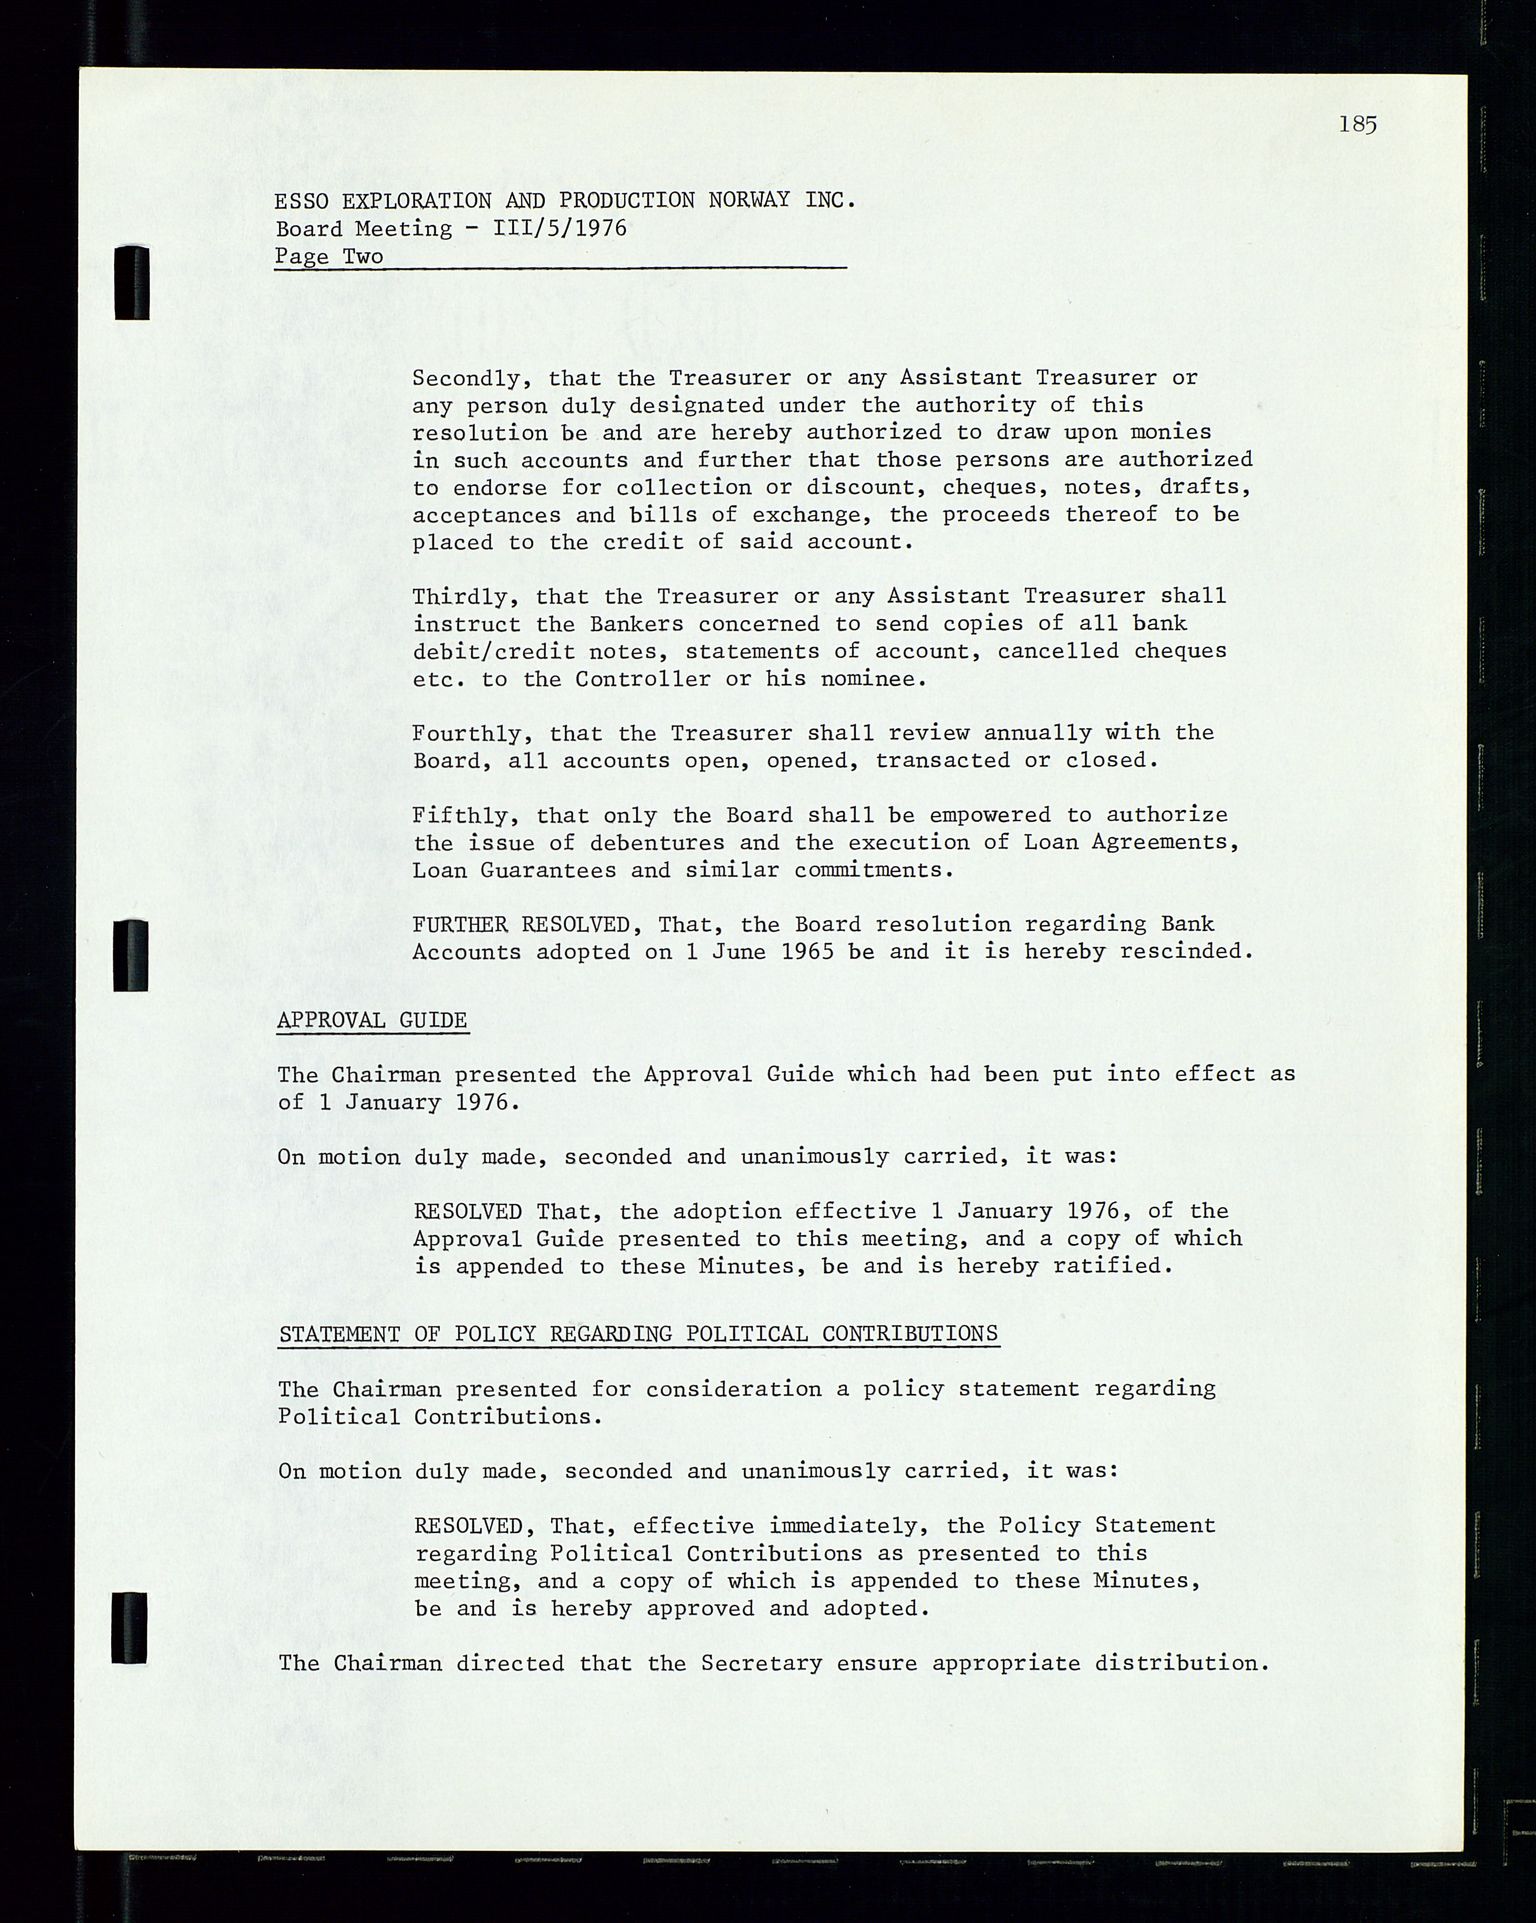 Pa 1512 - Esso Exploration and Production Norway Inc., SAST/A-101917/A/Aa/L0001/0002: Styredokumenter / Corporate records, Board meeting minutes, Agreements, Stocholder meetings, 1975-1979, p. 26